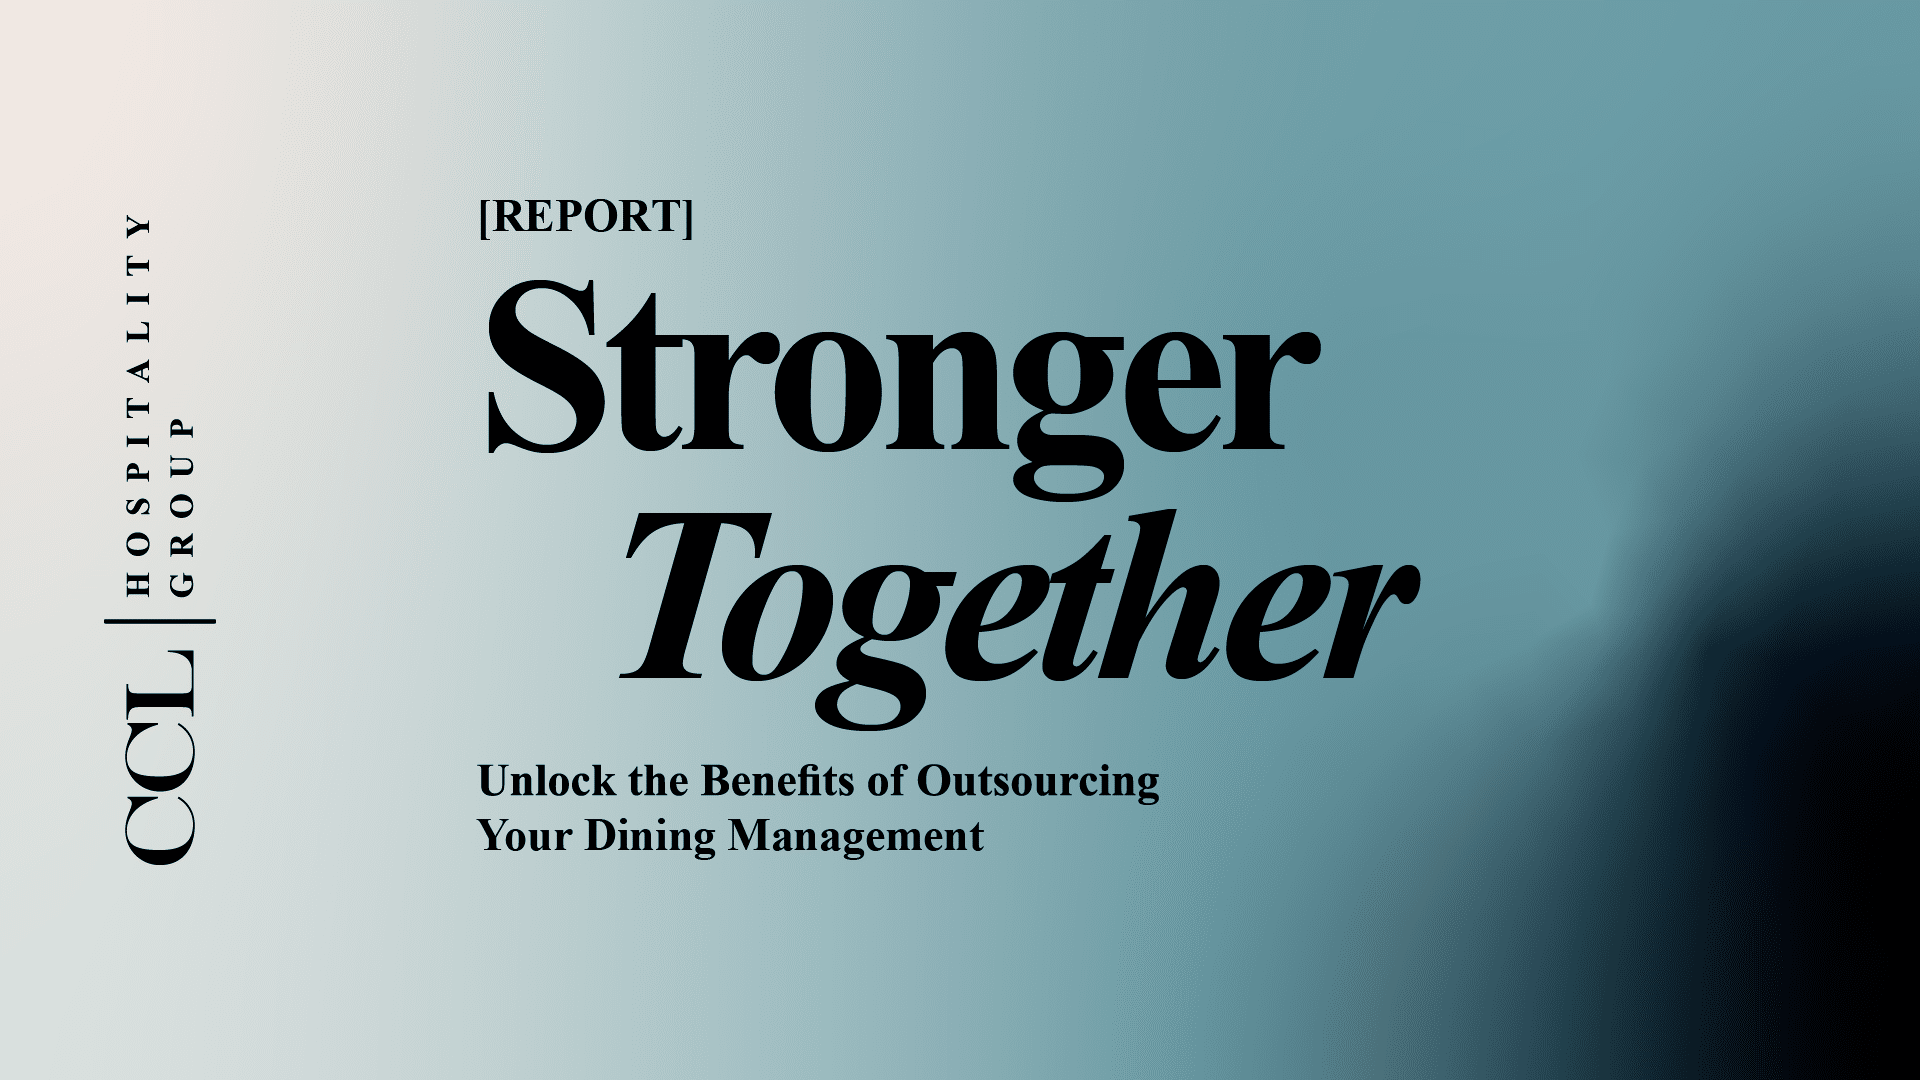 Report Stronger Together